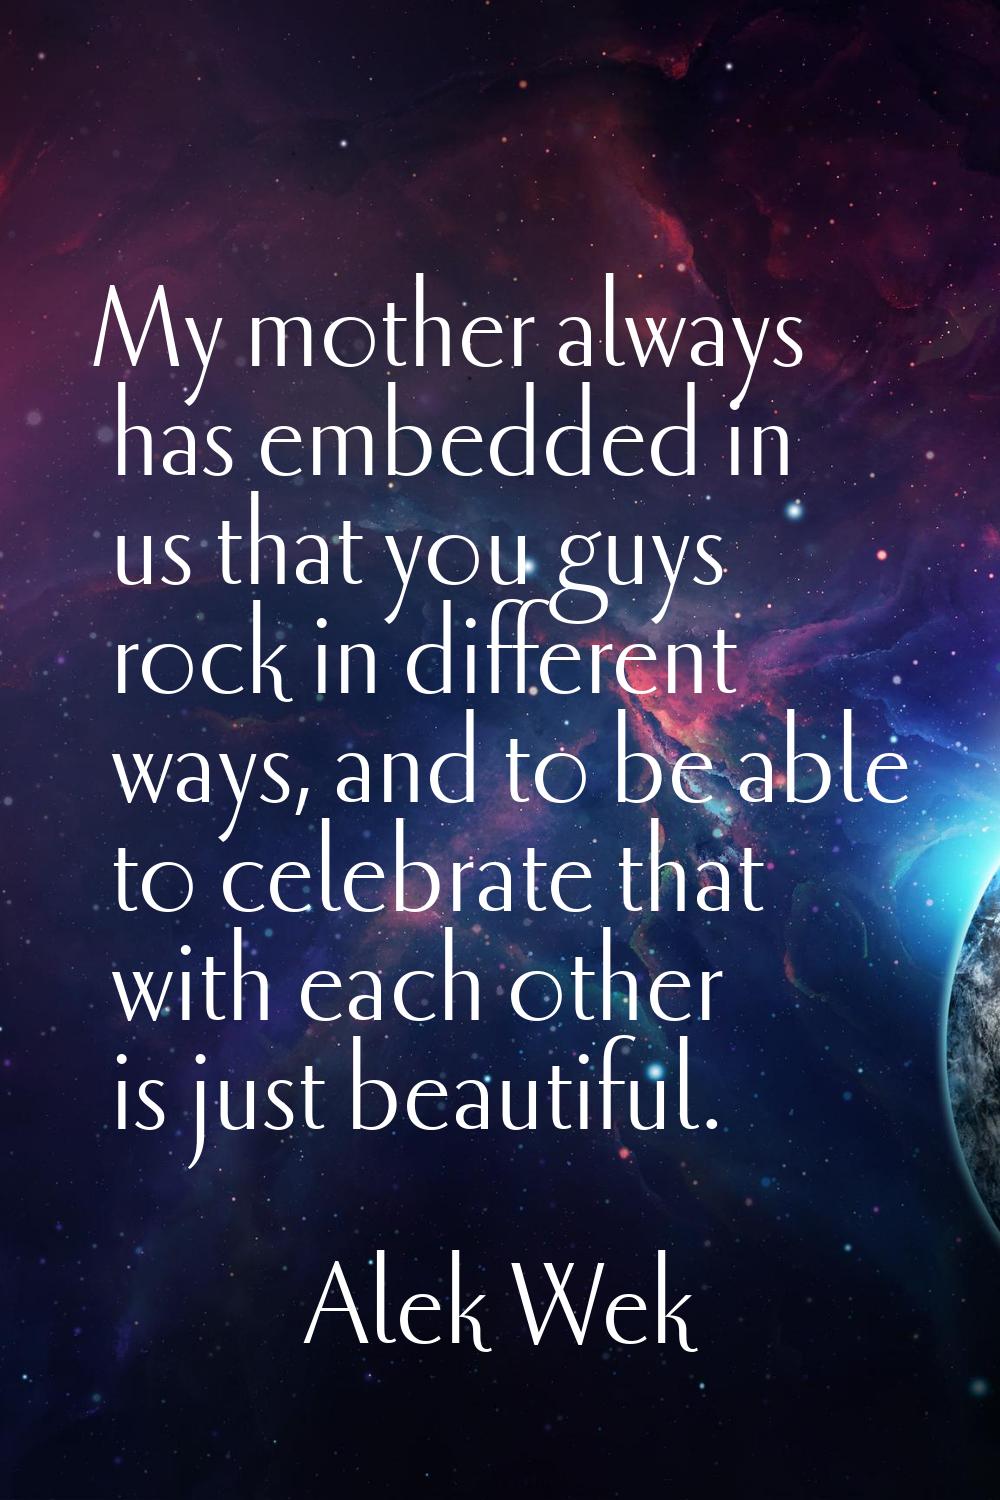 My mother always has embedded in us that you guys rock in different ways, and to be able to celebra